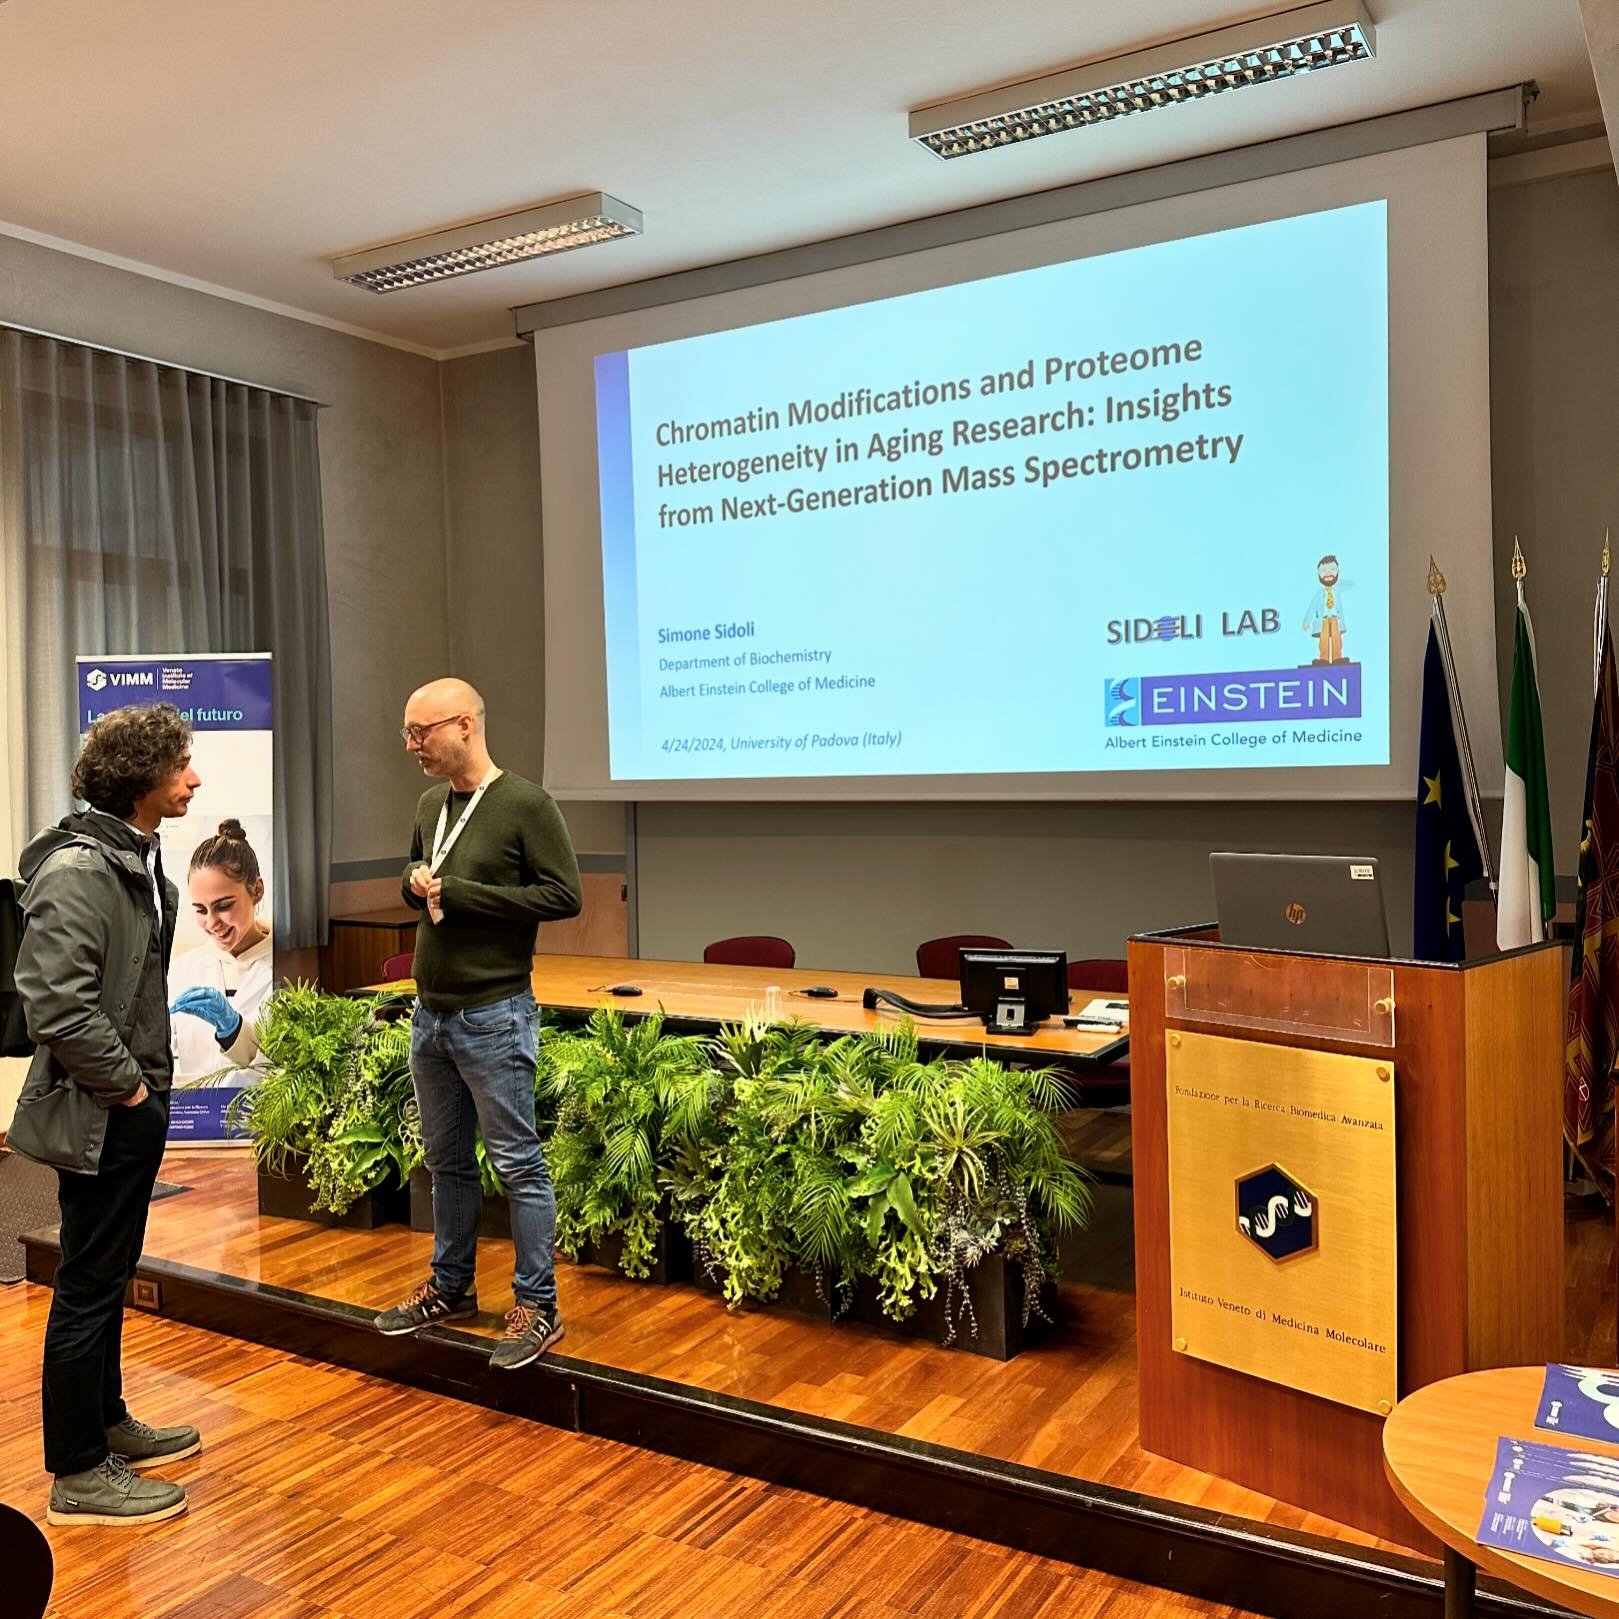 Simone getting ready for his talk at the VIMM (Padua, Italy)! Thank you Ale Carrer for the invite!!!